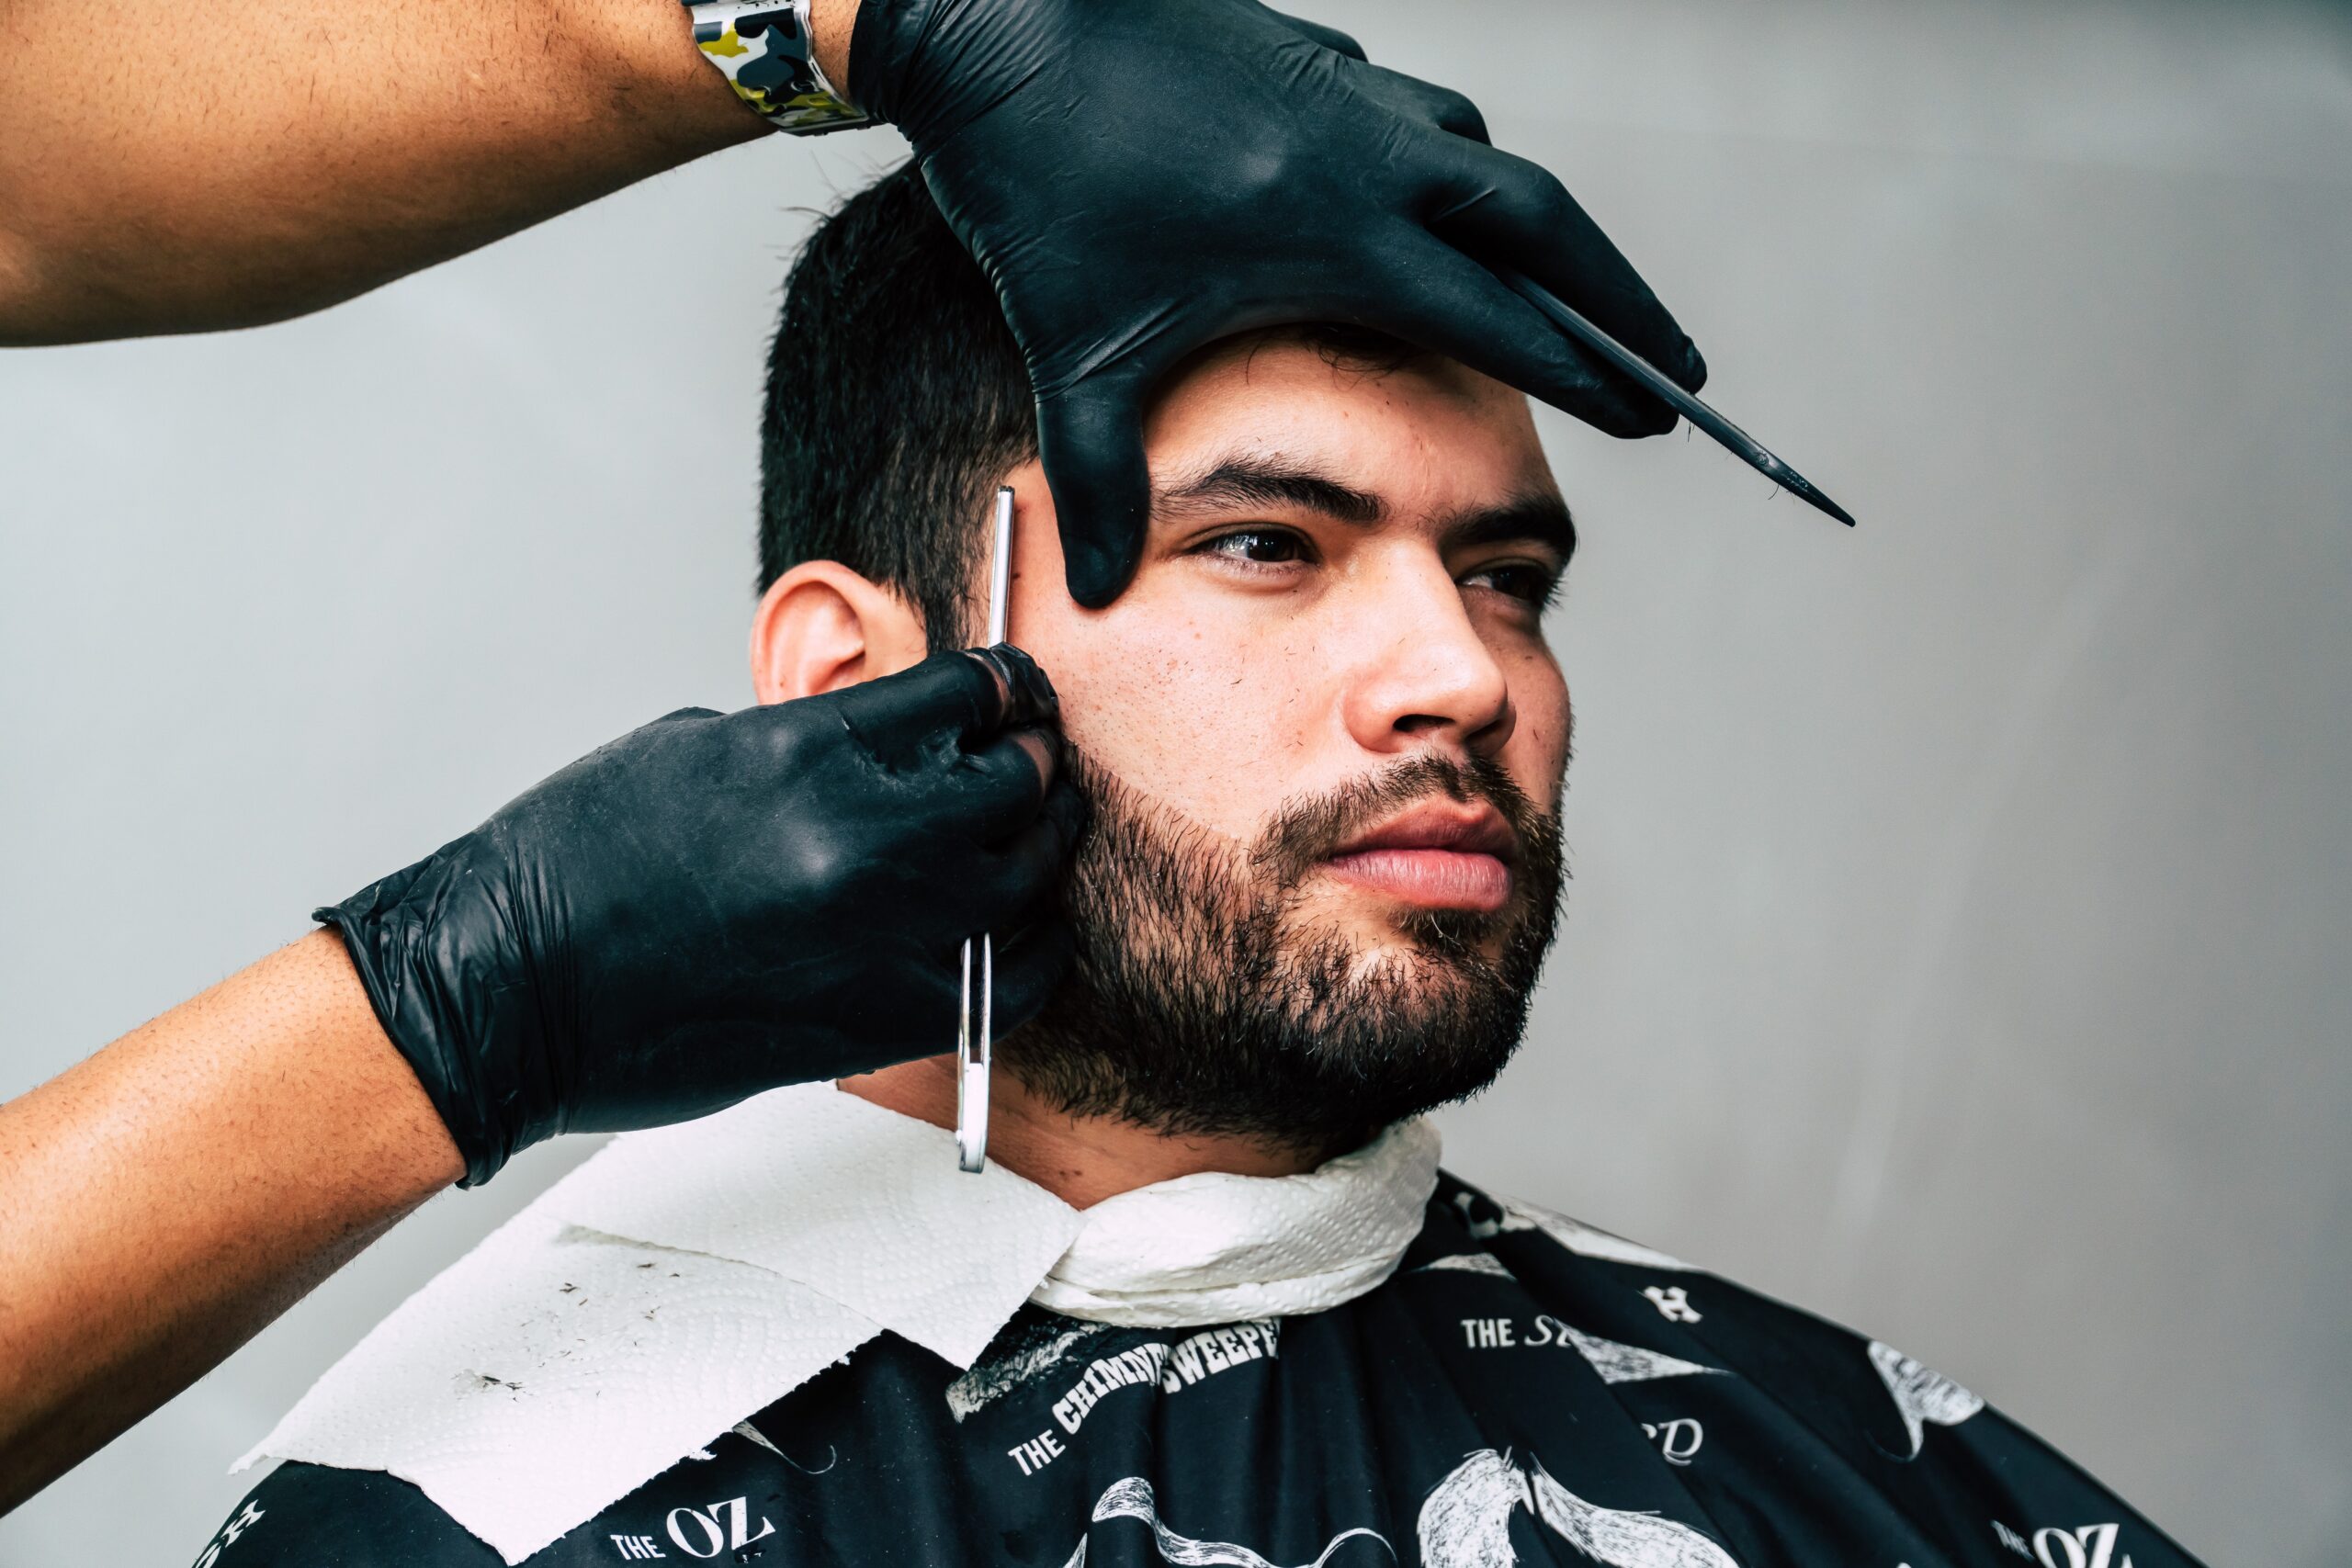 http://absolute-barbers.co.uk/wp-content/uploads/2021/06/pexels-mídia-897262-scaled.jpg